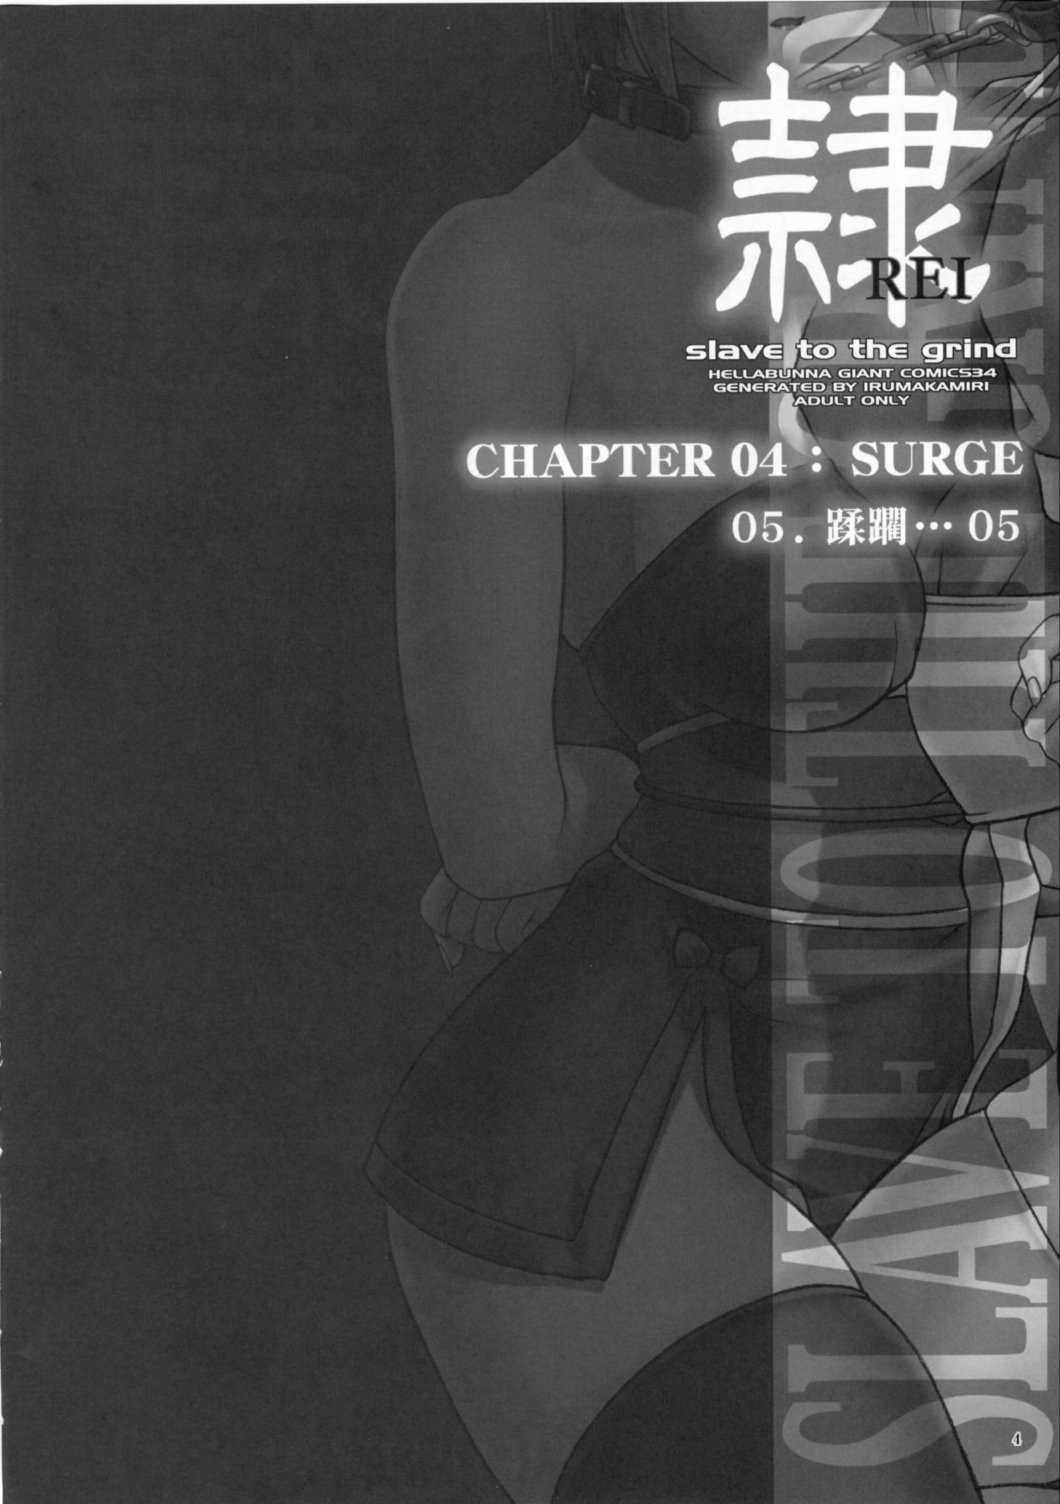 [Hellabunna] Rei Chapter 04 Surge (Dead or Alive) (BR) 